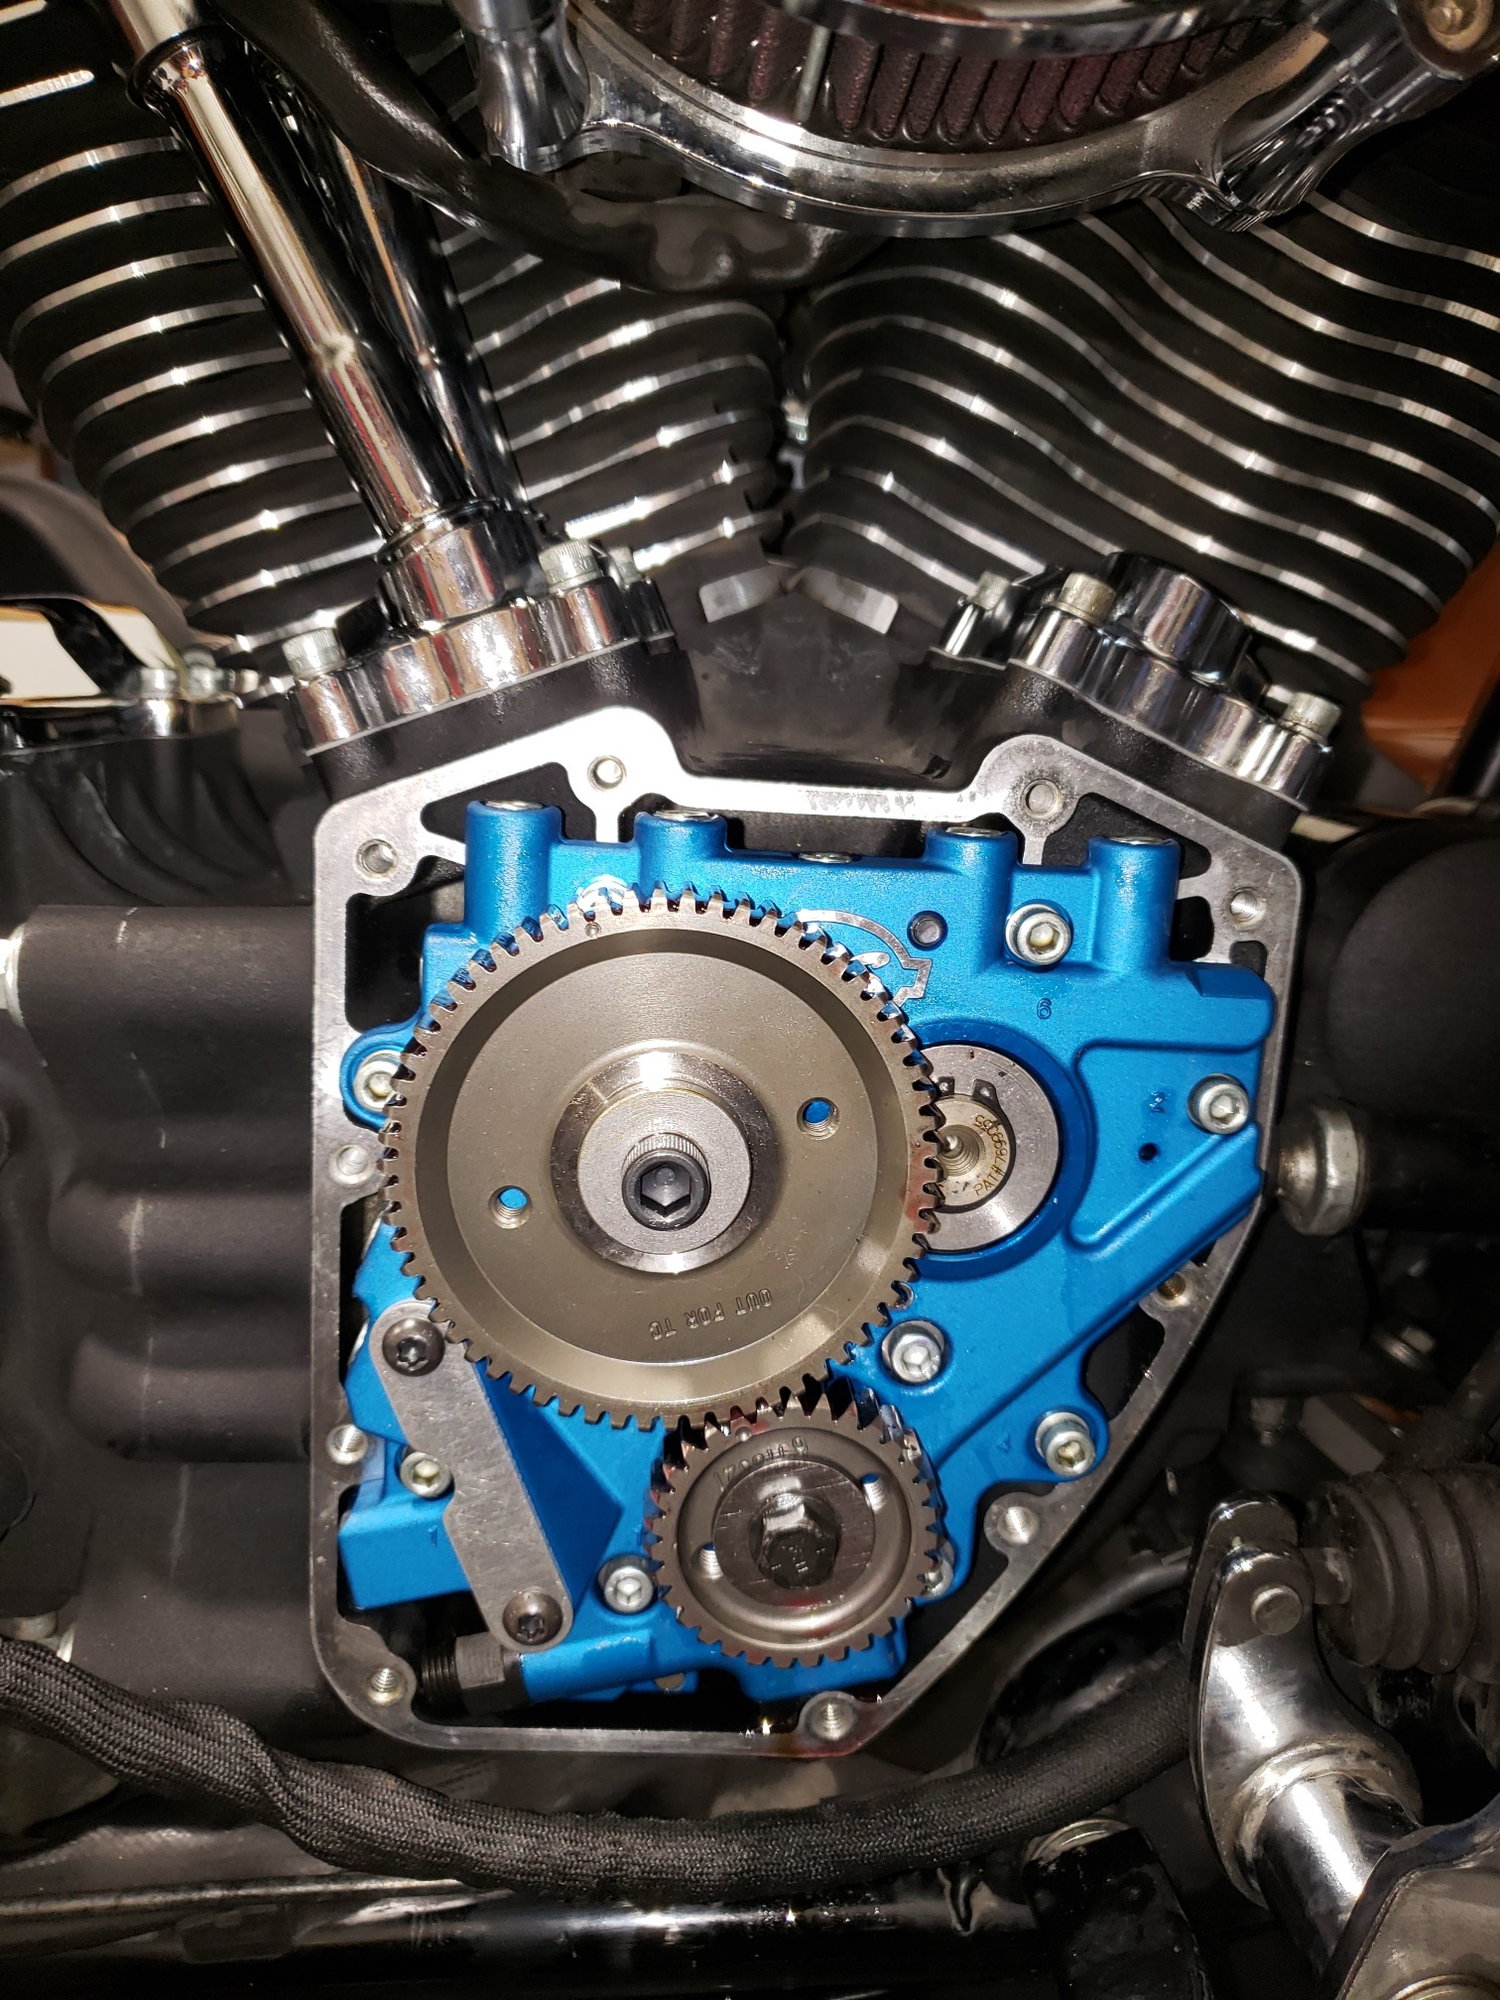 2004 Twin Cam 88- Cams and Gear Drive? - Harley Davidson Forums